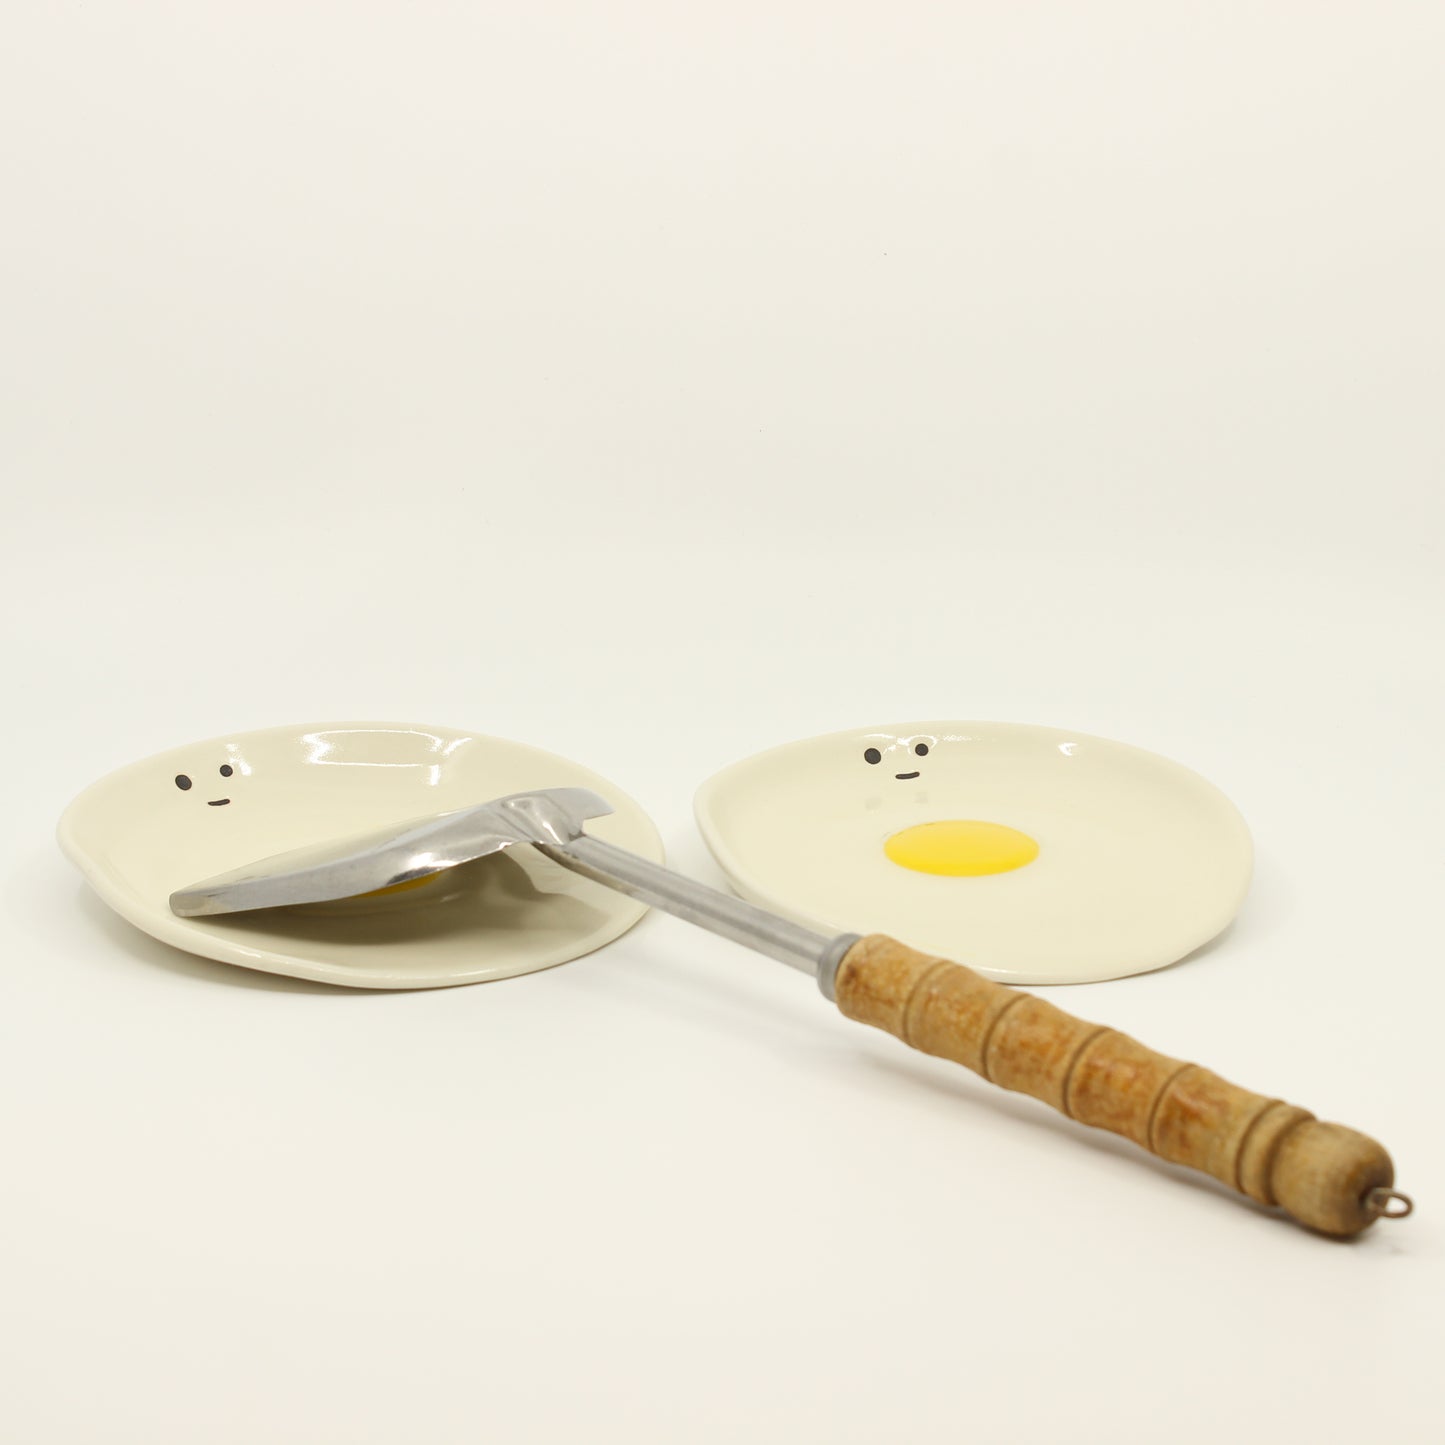 Sunny-Side-Up Egg Spoon Rest